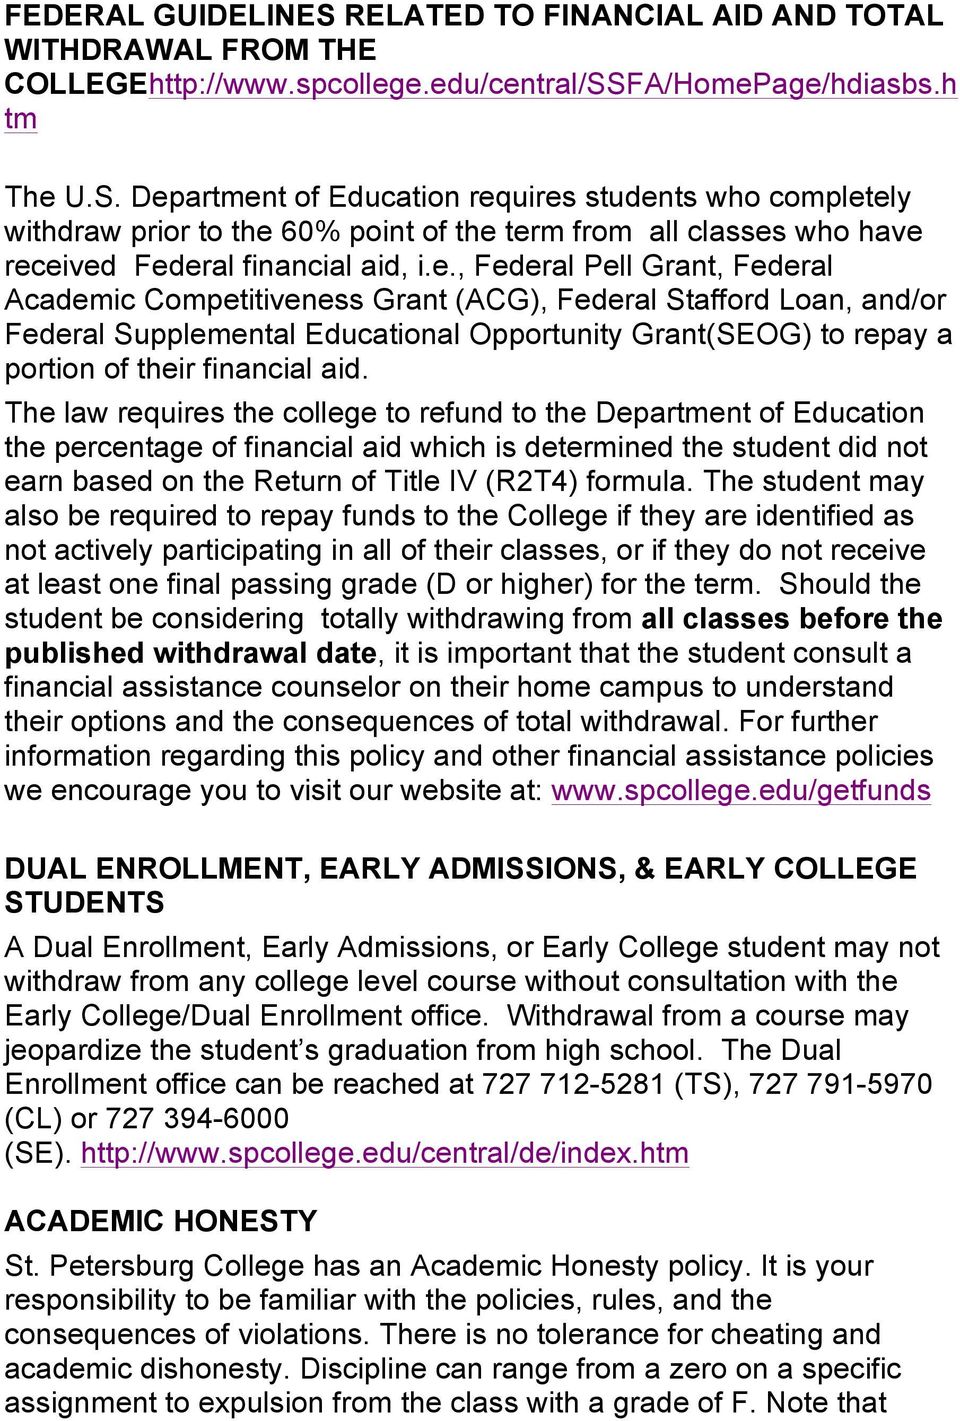 The law requires the college to refund to the Department of Education the percentage of financial aid which is determined the student did not earn based on the Return of Title IV (R2T4) formula.